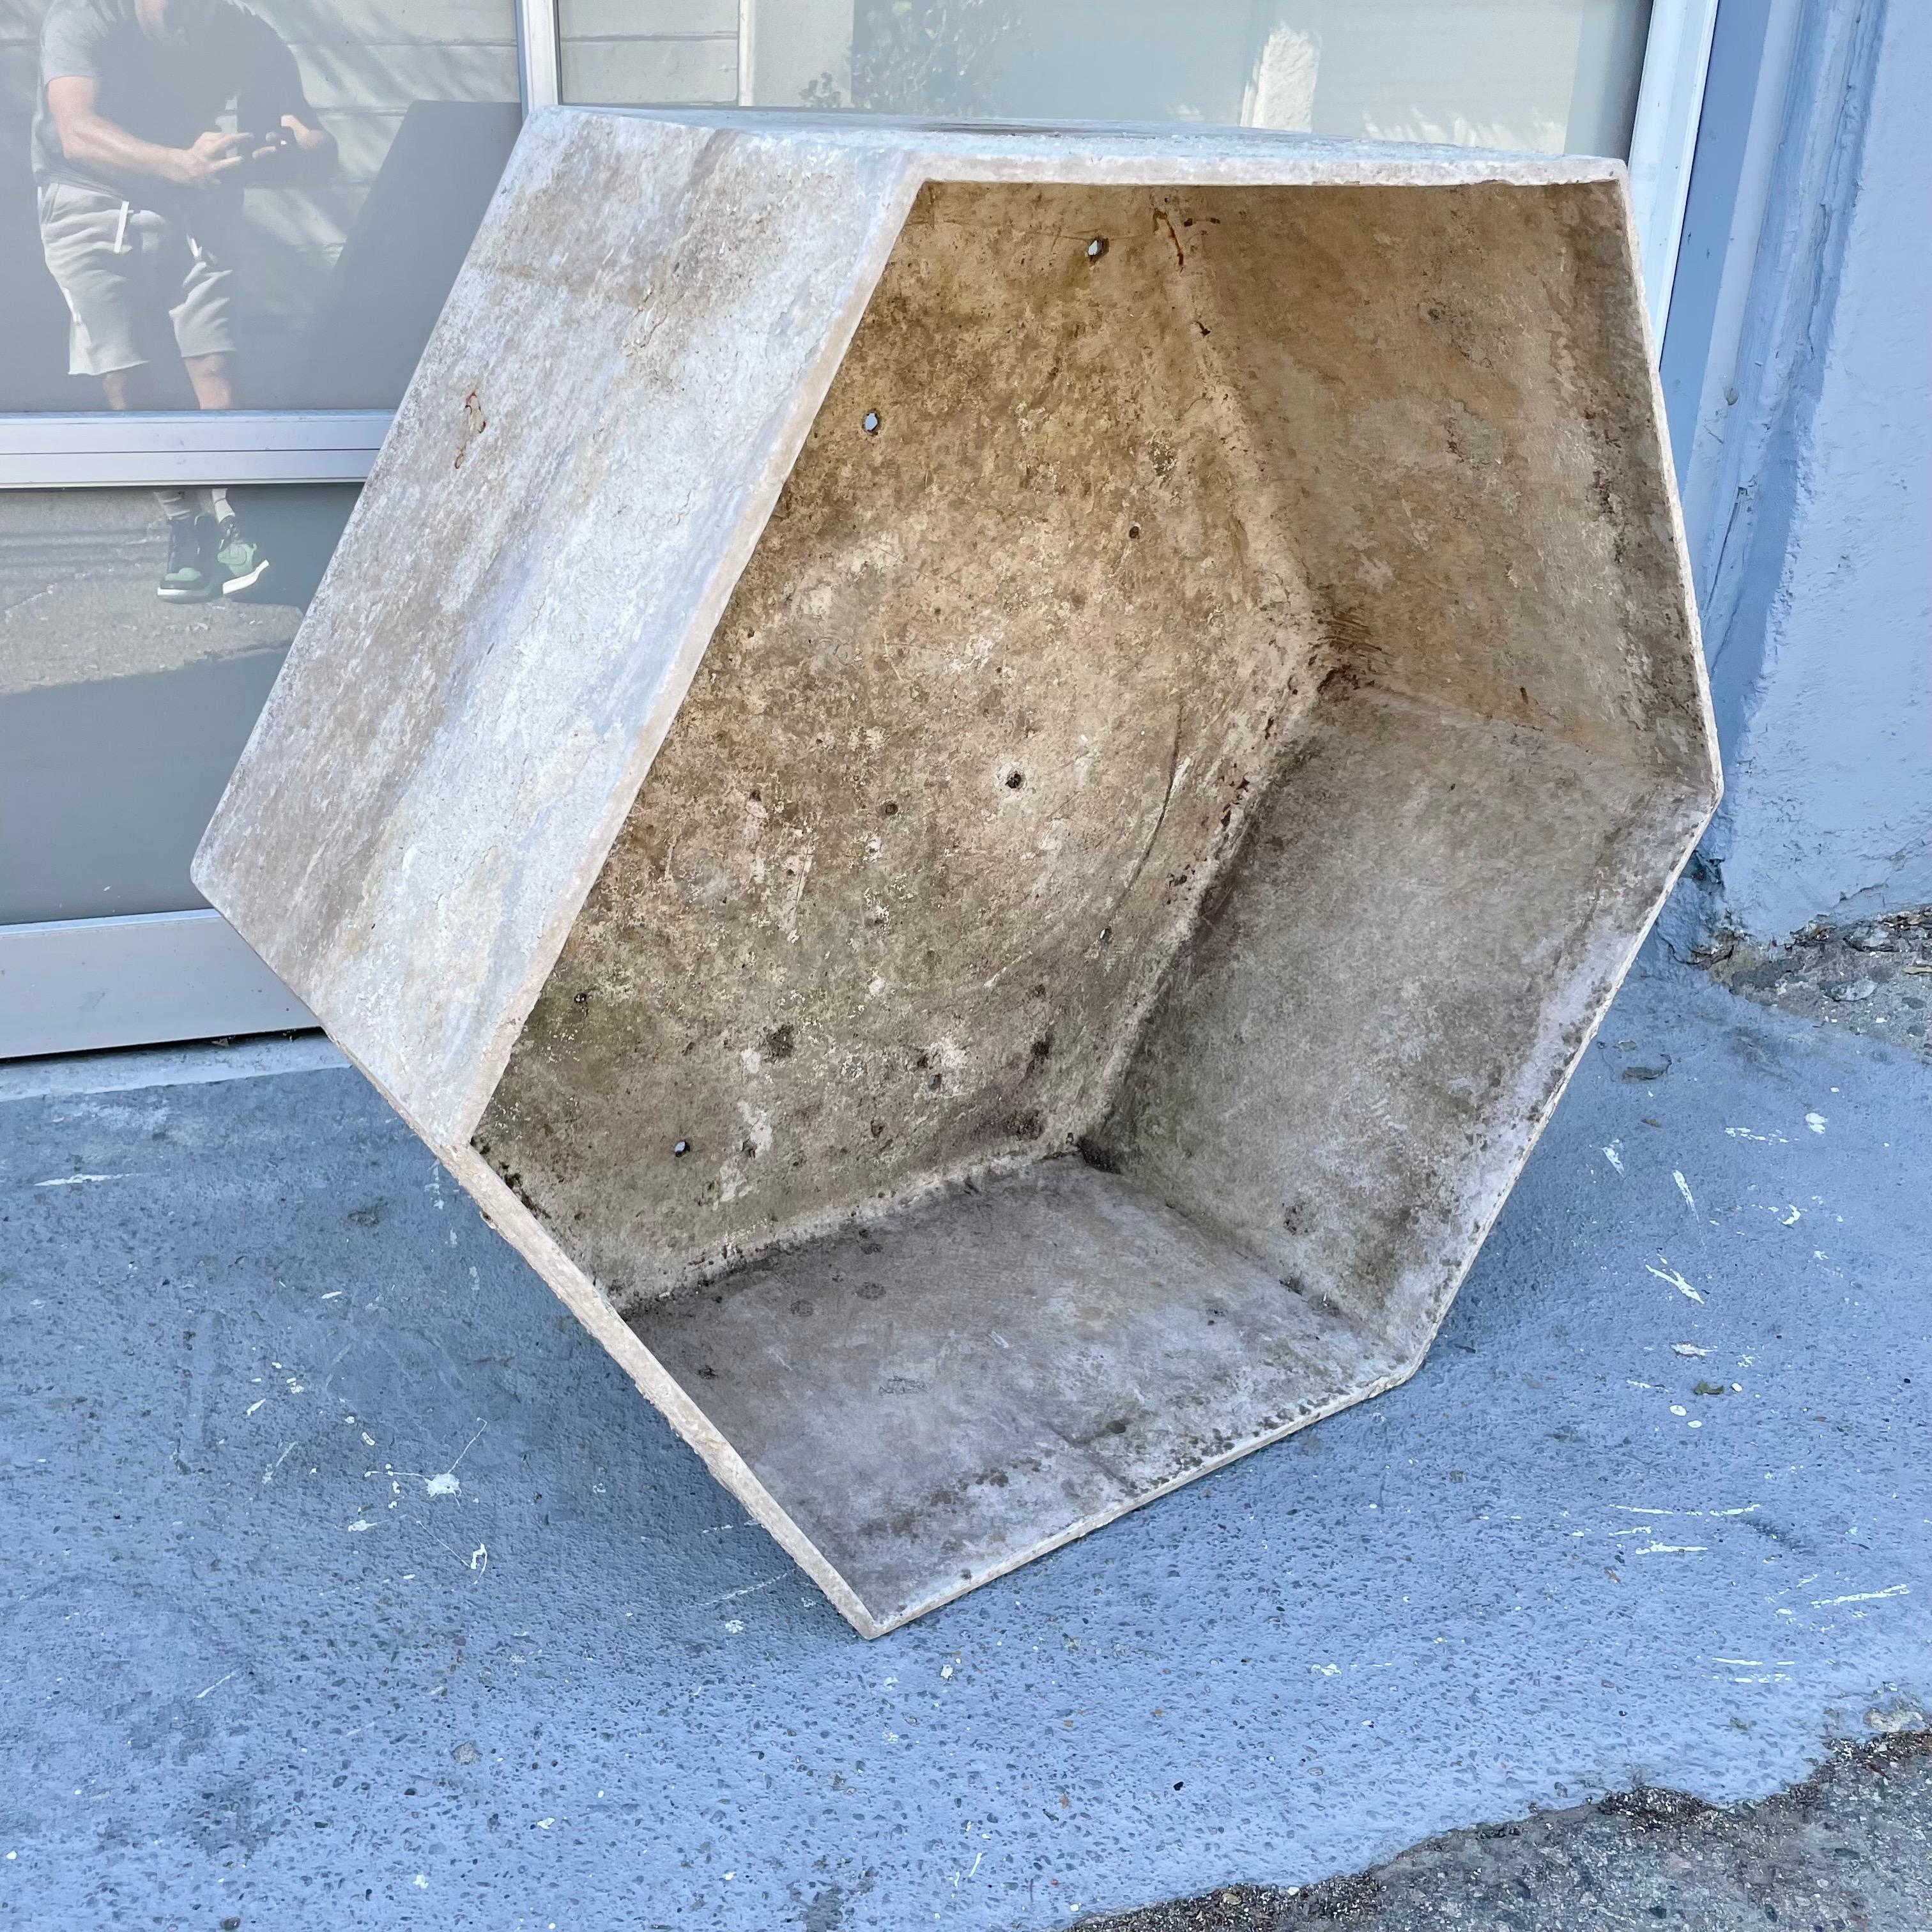 Monumental concrete hexagon planter by Willy Guhl. Handmade in Switzerland. Dated 1986. Powerful presence and patina. Factory drilled drainage holes. Unusual shape. Very good condition. Great lines. Cool piece of outdoor sculpture.